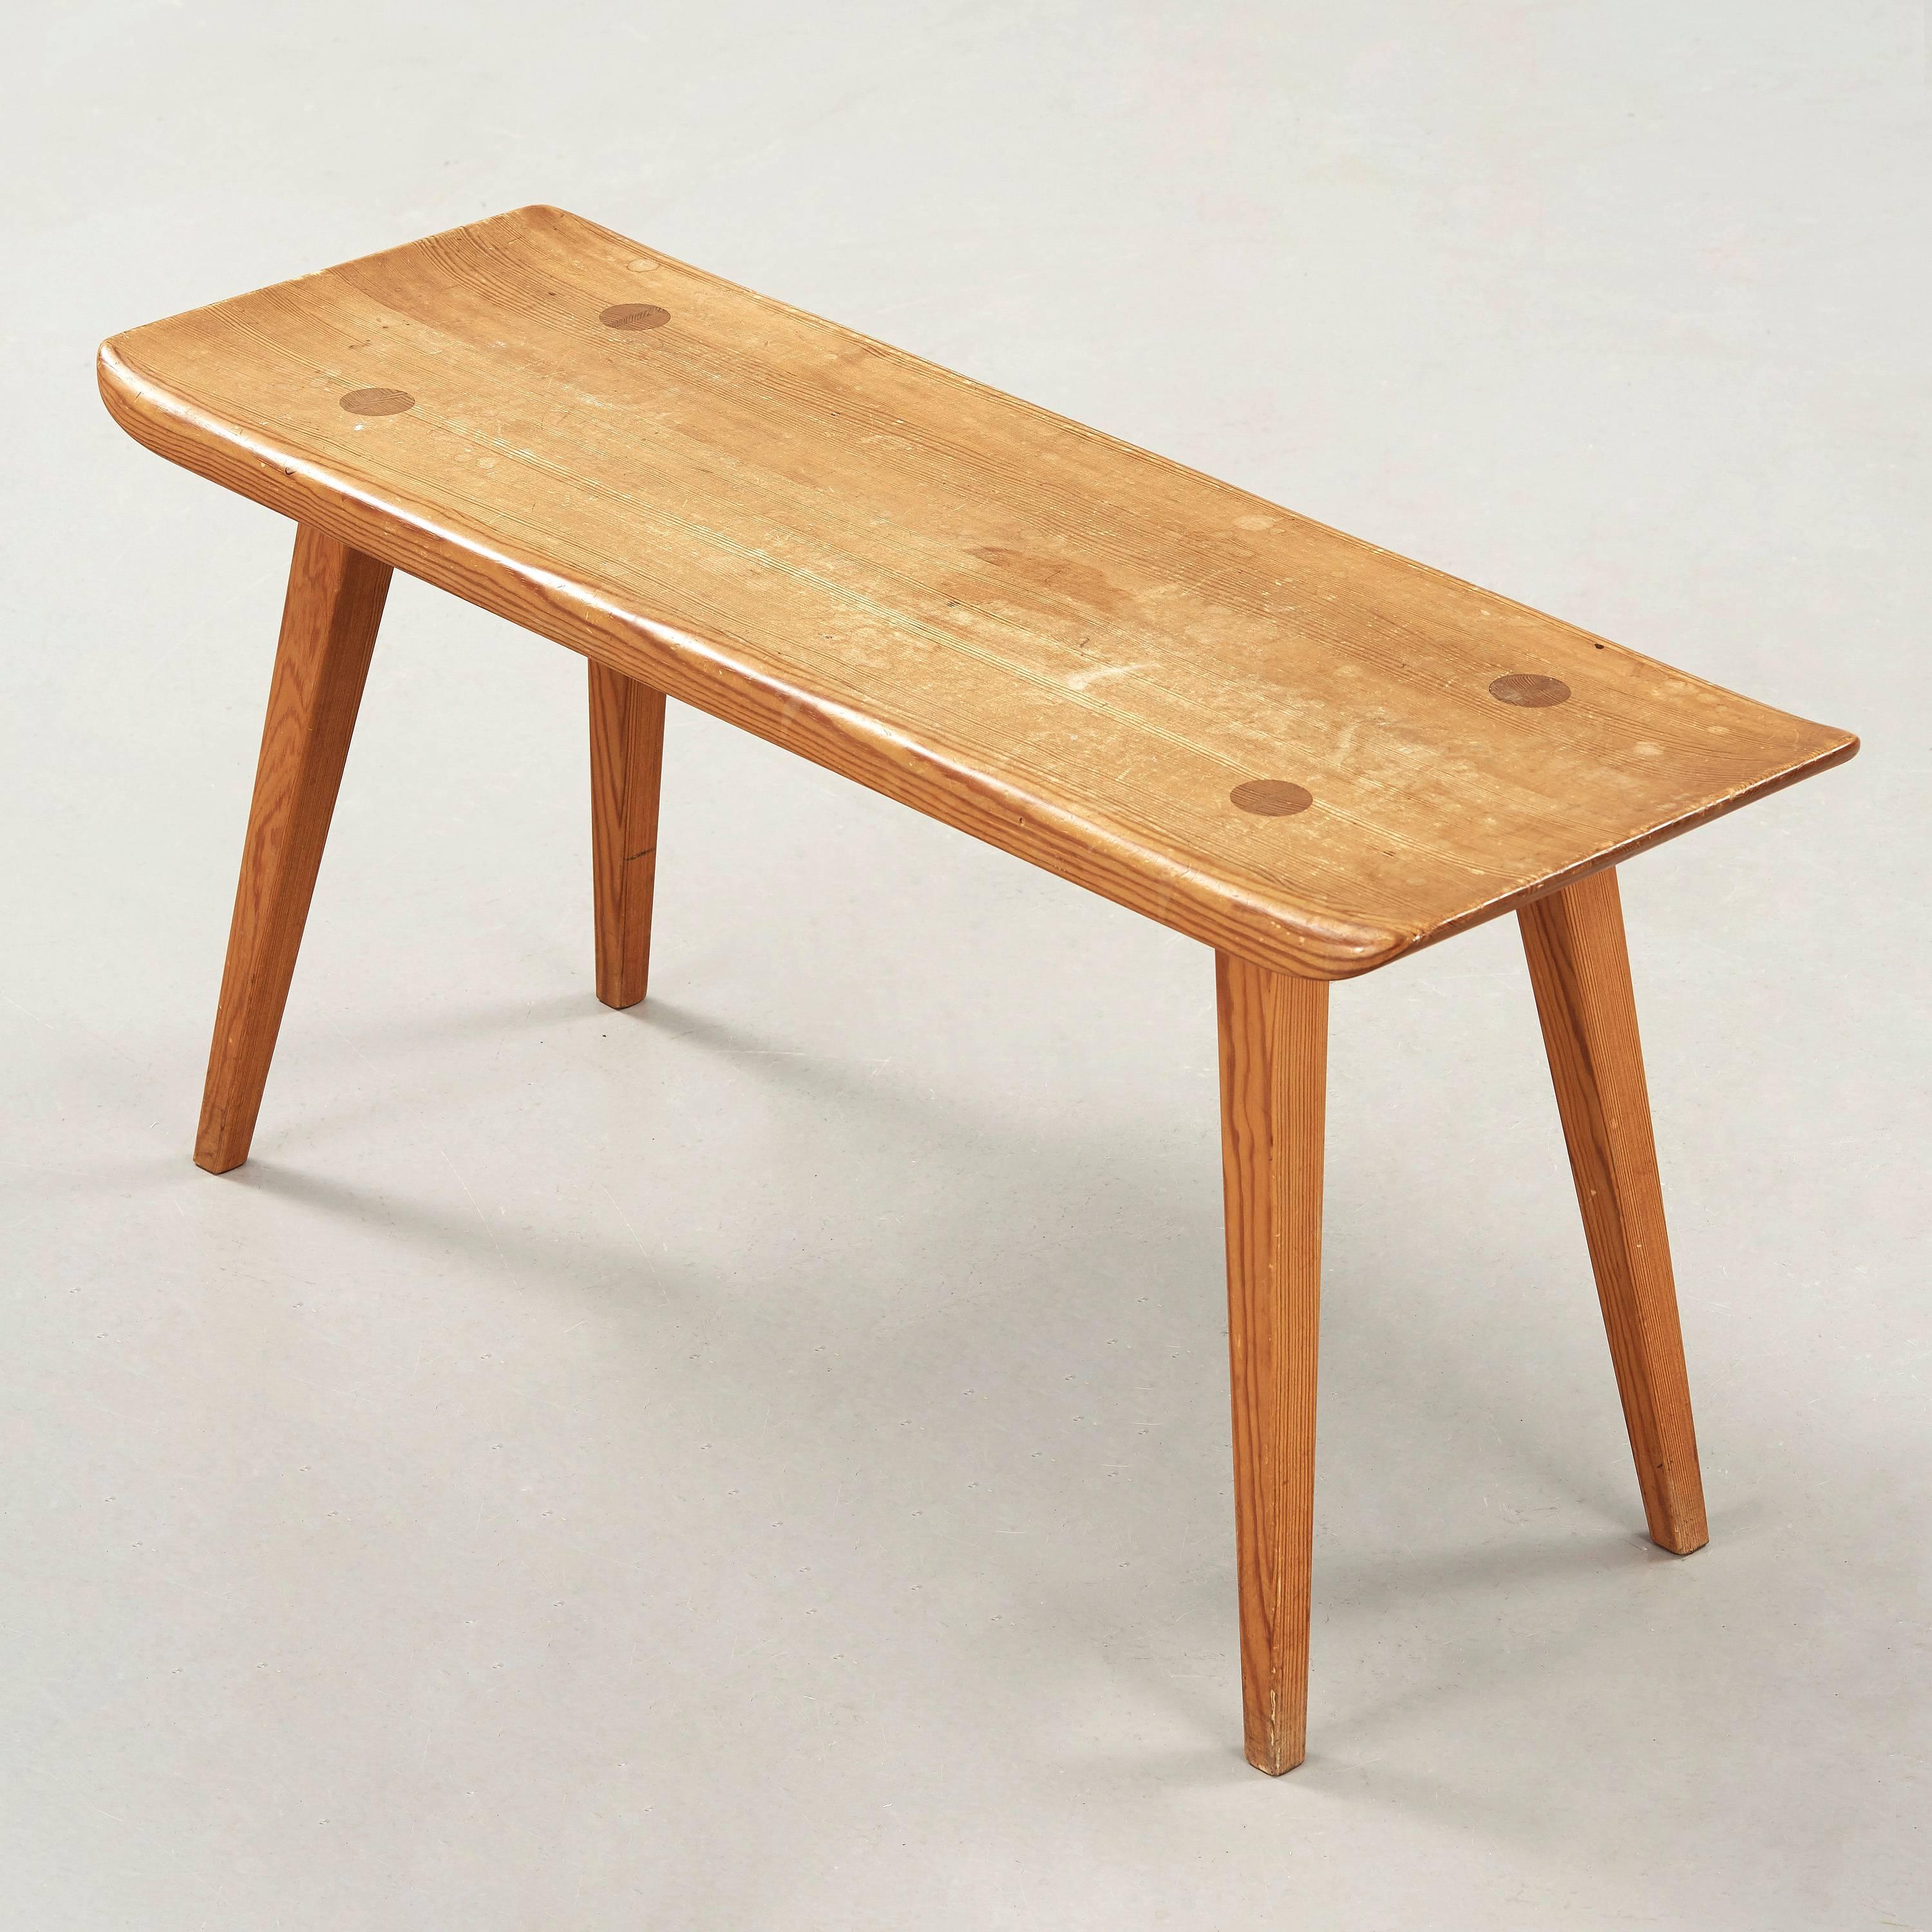 Pine bench model 'Vikings' designed by Carl Malmsten and manufactured by Karl Andersson & Soner.